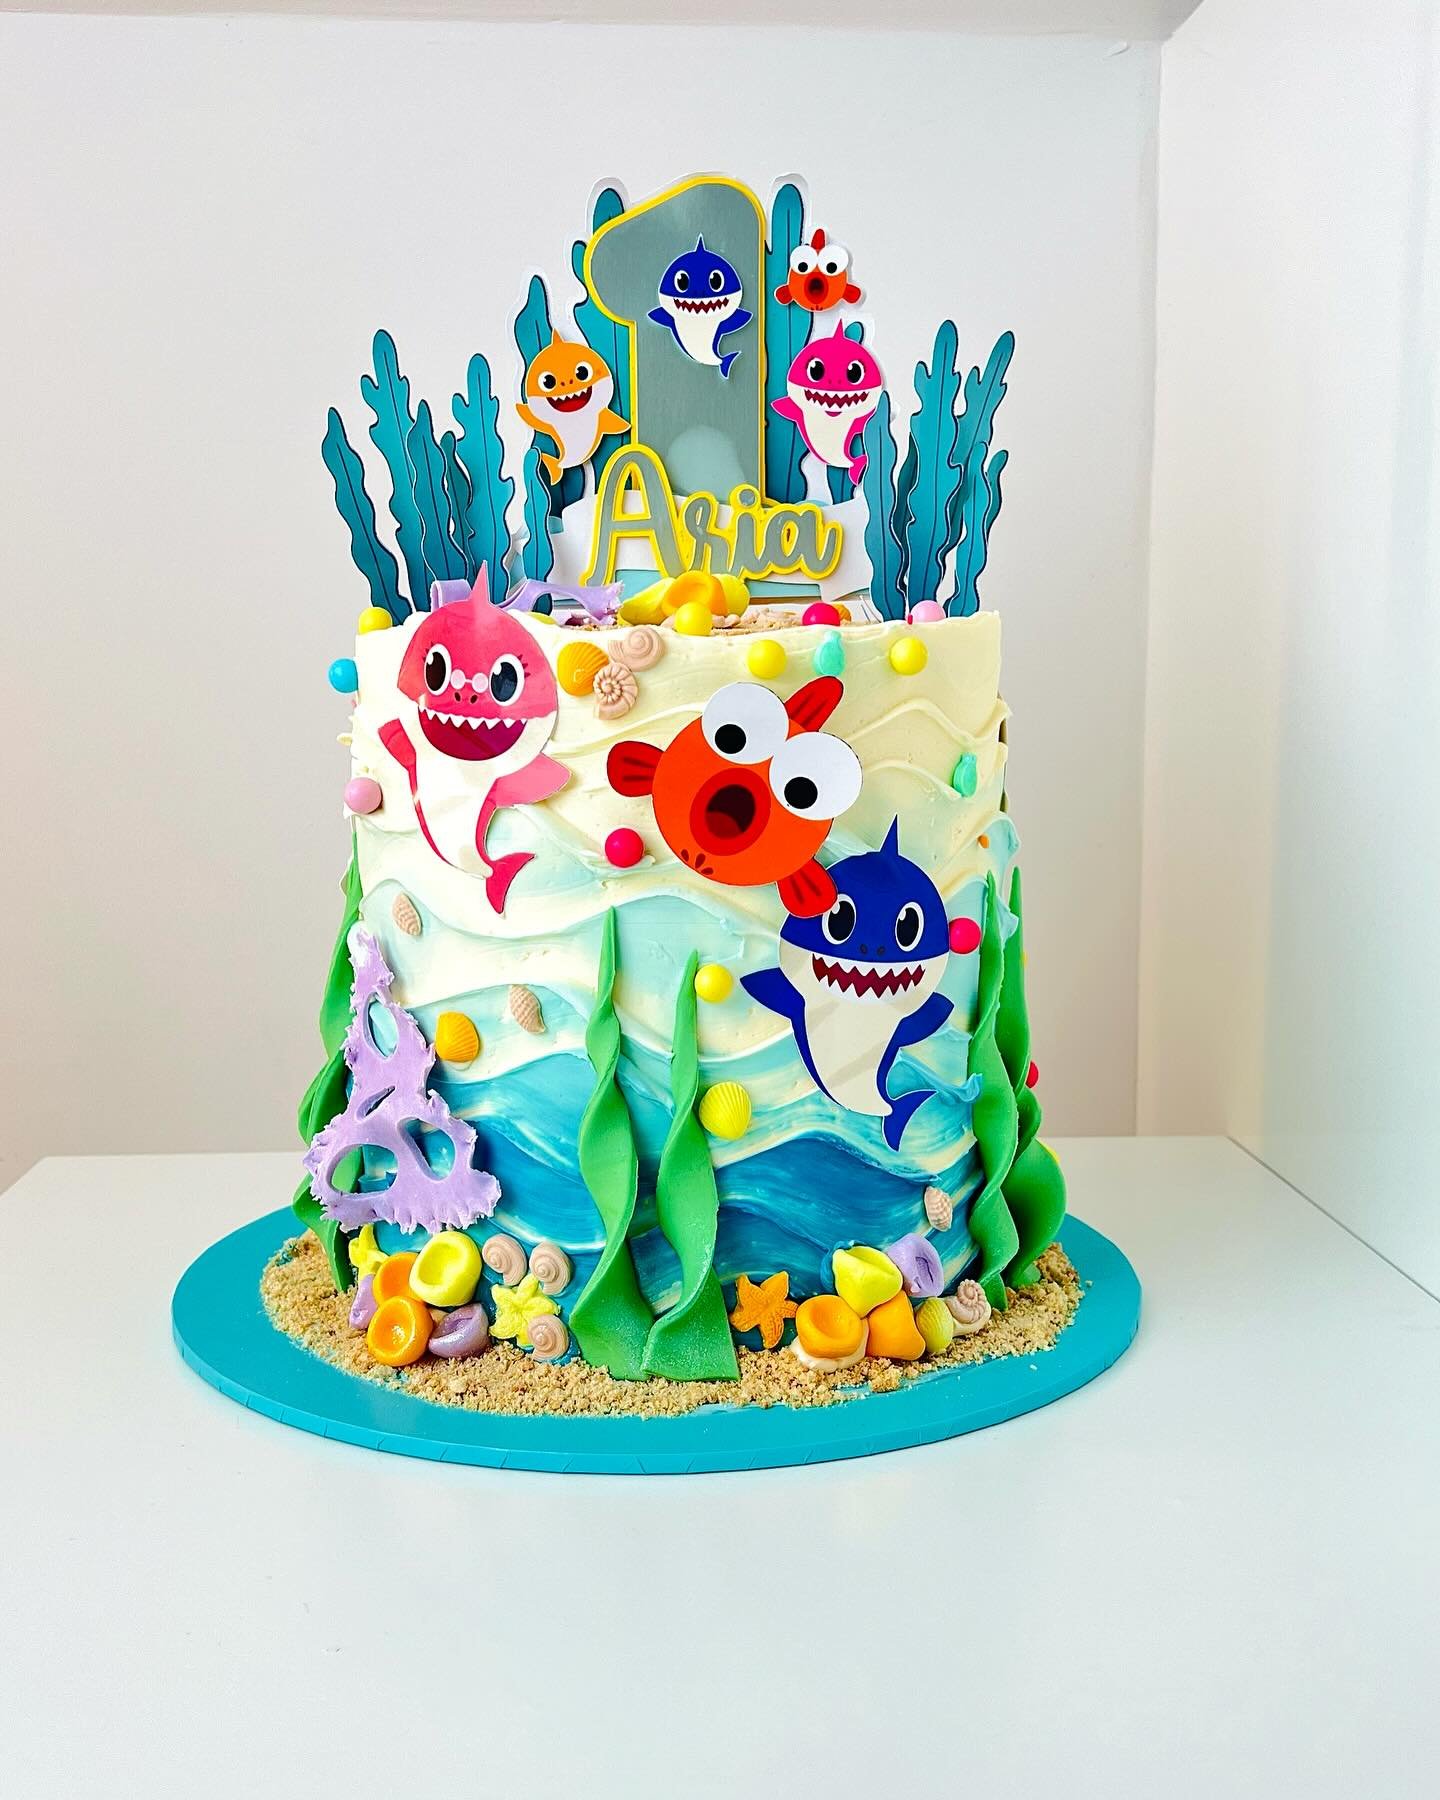 Baby Shark Cake!!!

From@baby shower cake to first birthday cake, we love loyal customers.

Layers of vanilla sponge with strawberry jam as requested.
Hit the link in the bio for the experience 😁😁

#babysharkcake #southampton #cakesinsouthampton